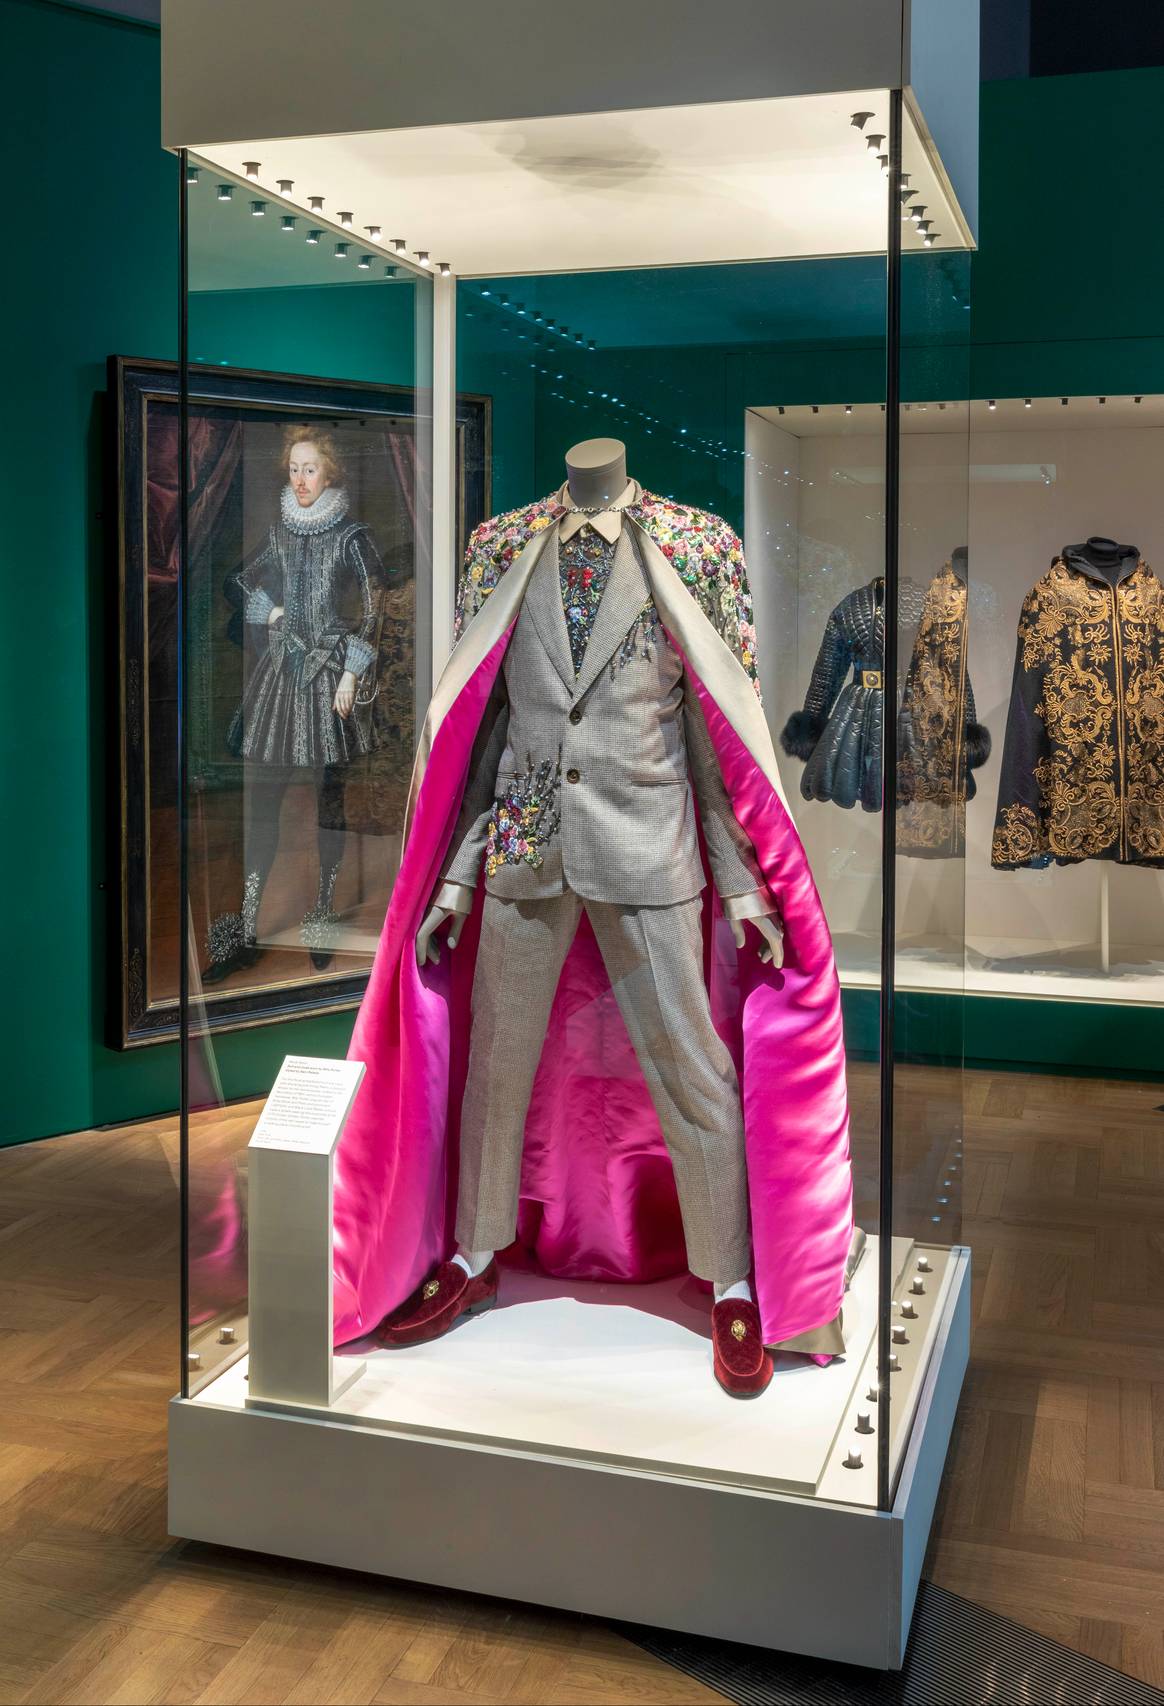 Image: V&A; Fashioning Masculinities: The Art of Menswear